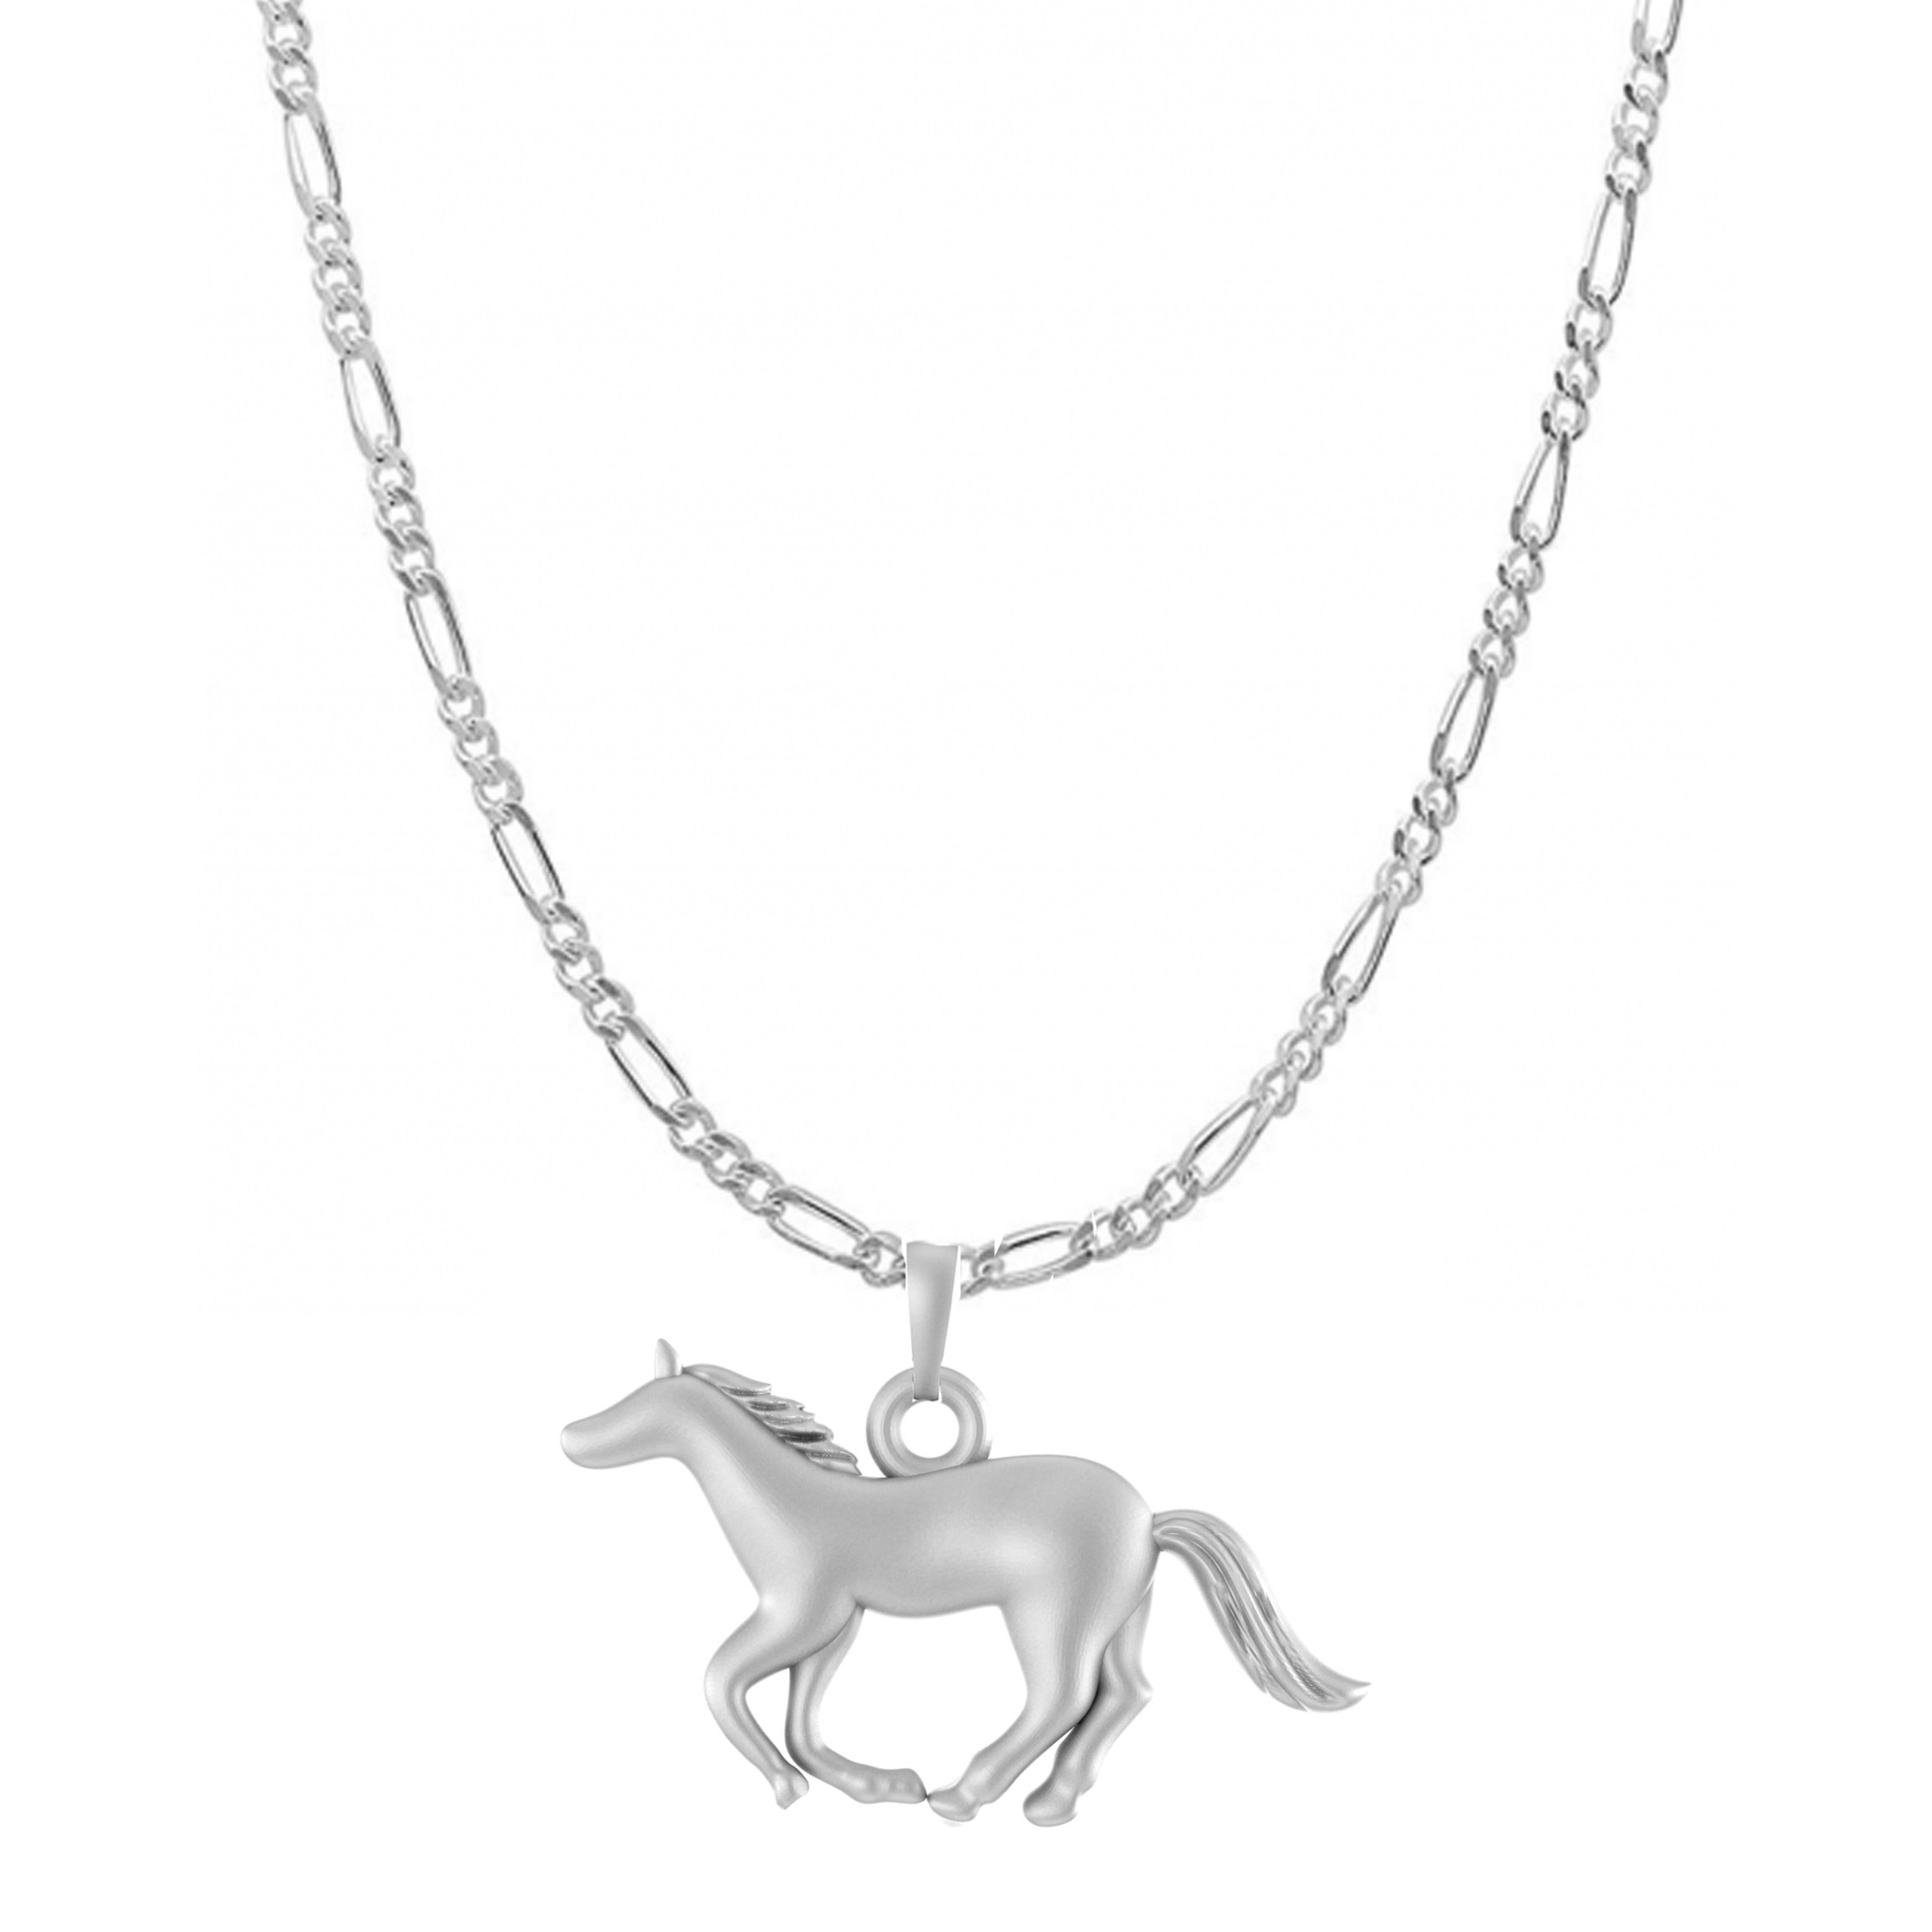 Akshat Sapphire Sterling Silver (92.5% purity) Strength Symbolic Horse Chain Pendant (Pendant with Figaro Chain) for Men & Women Pure Silver Horse Chain Locket to represent strength and power